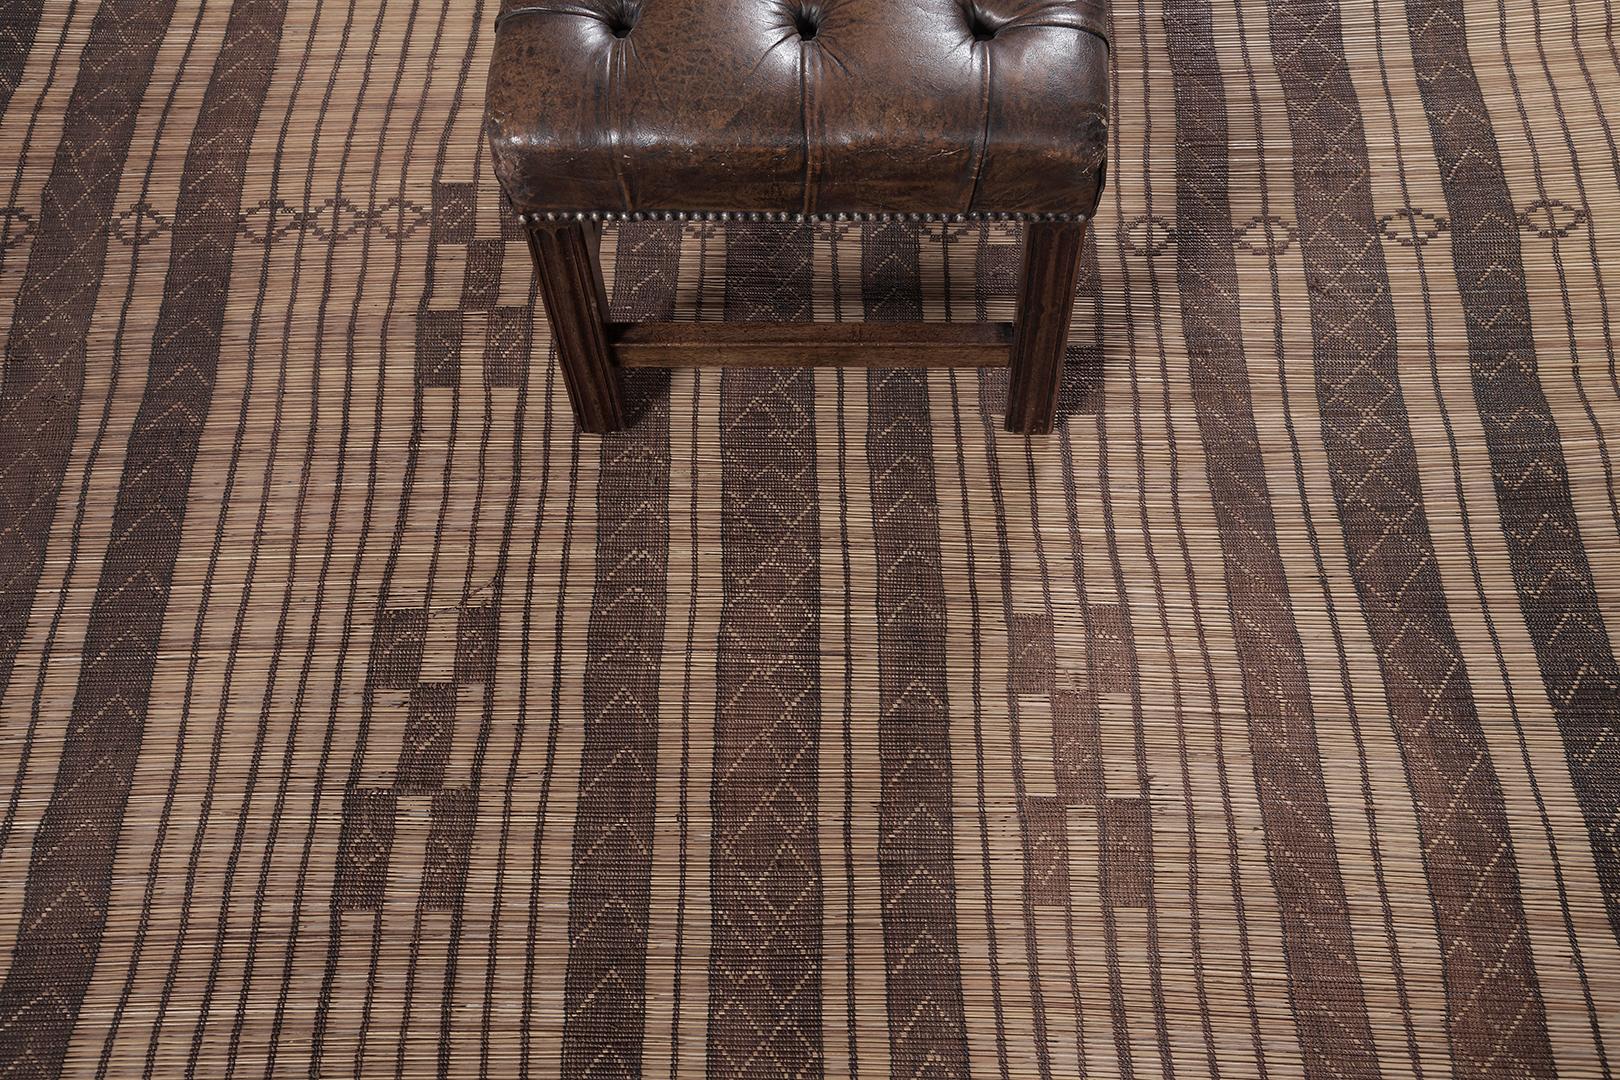 This phenomenal handwoven in reed and leather Tuareg mat features all the elegant thin outlined diamonds, checkered patterns, reversed V symbols, circle, and zigzag patterns. This mat can give an accent to any stylish and traditional-ethnic